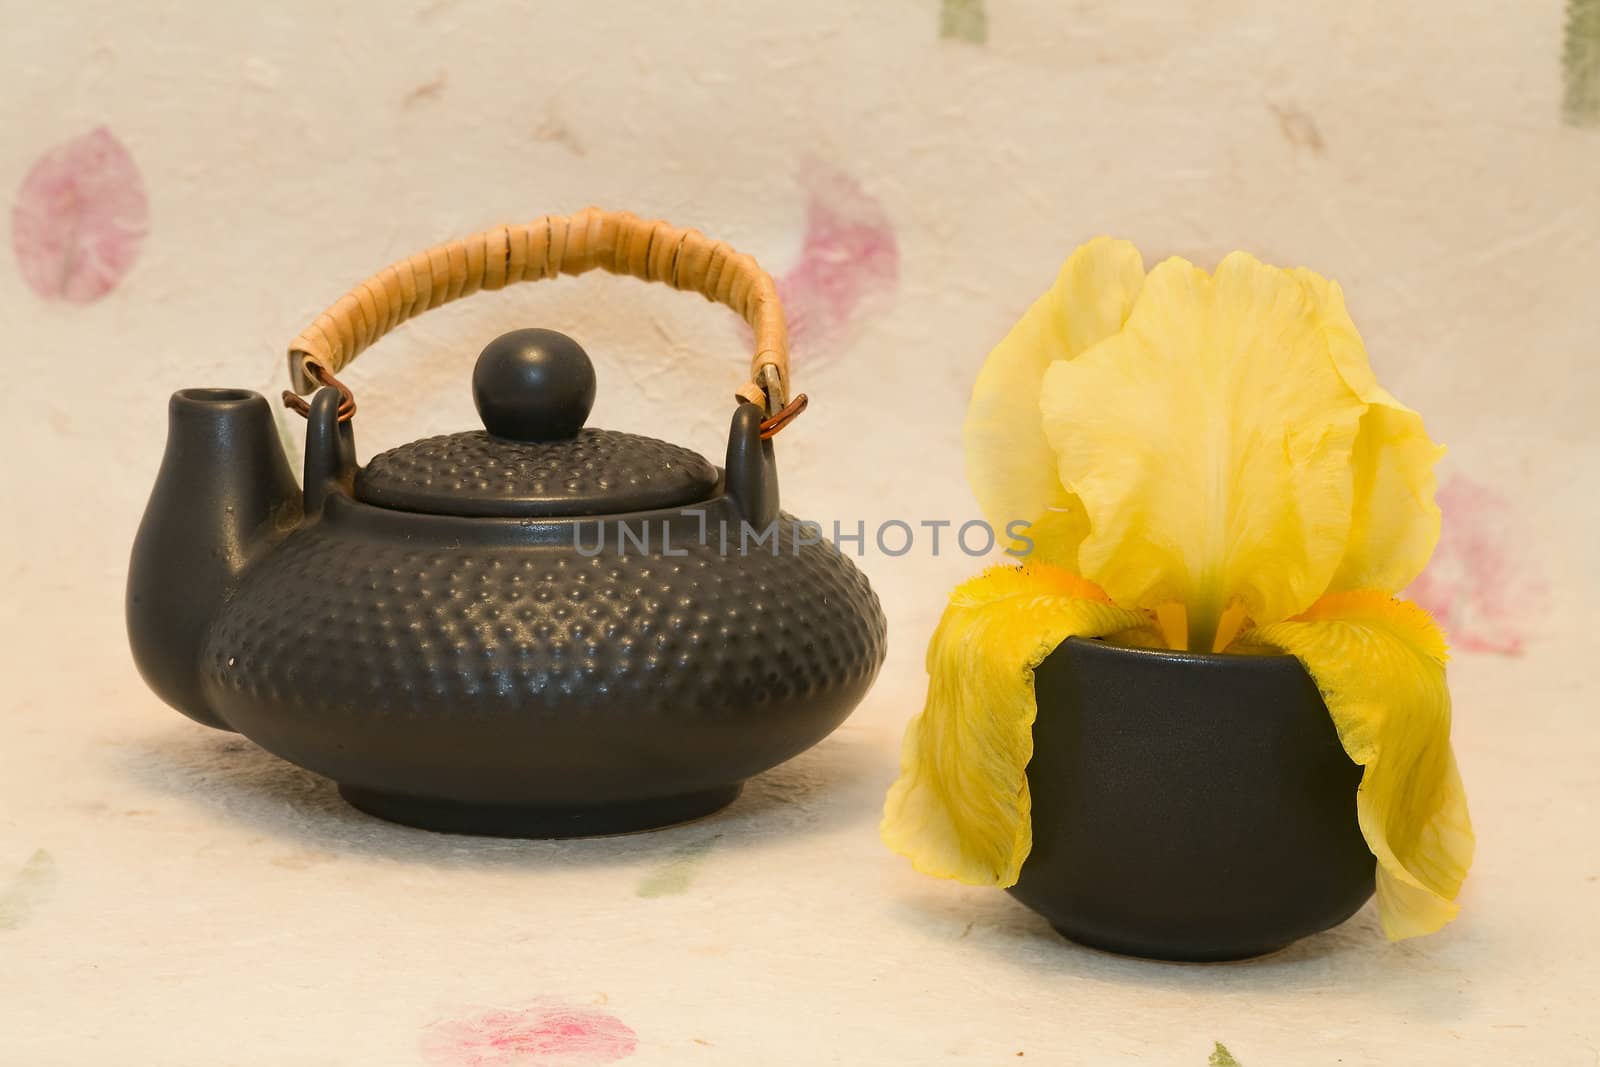  Yellow iris and black teapot and cup by foryouinf